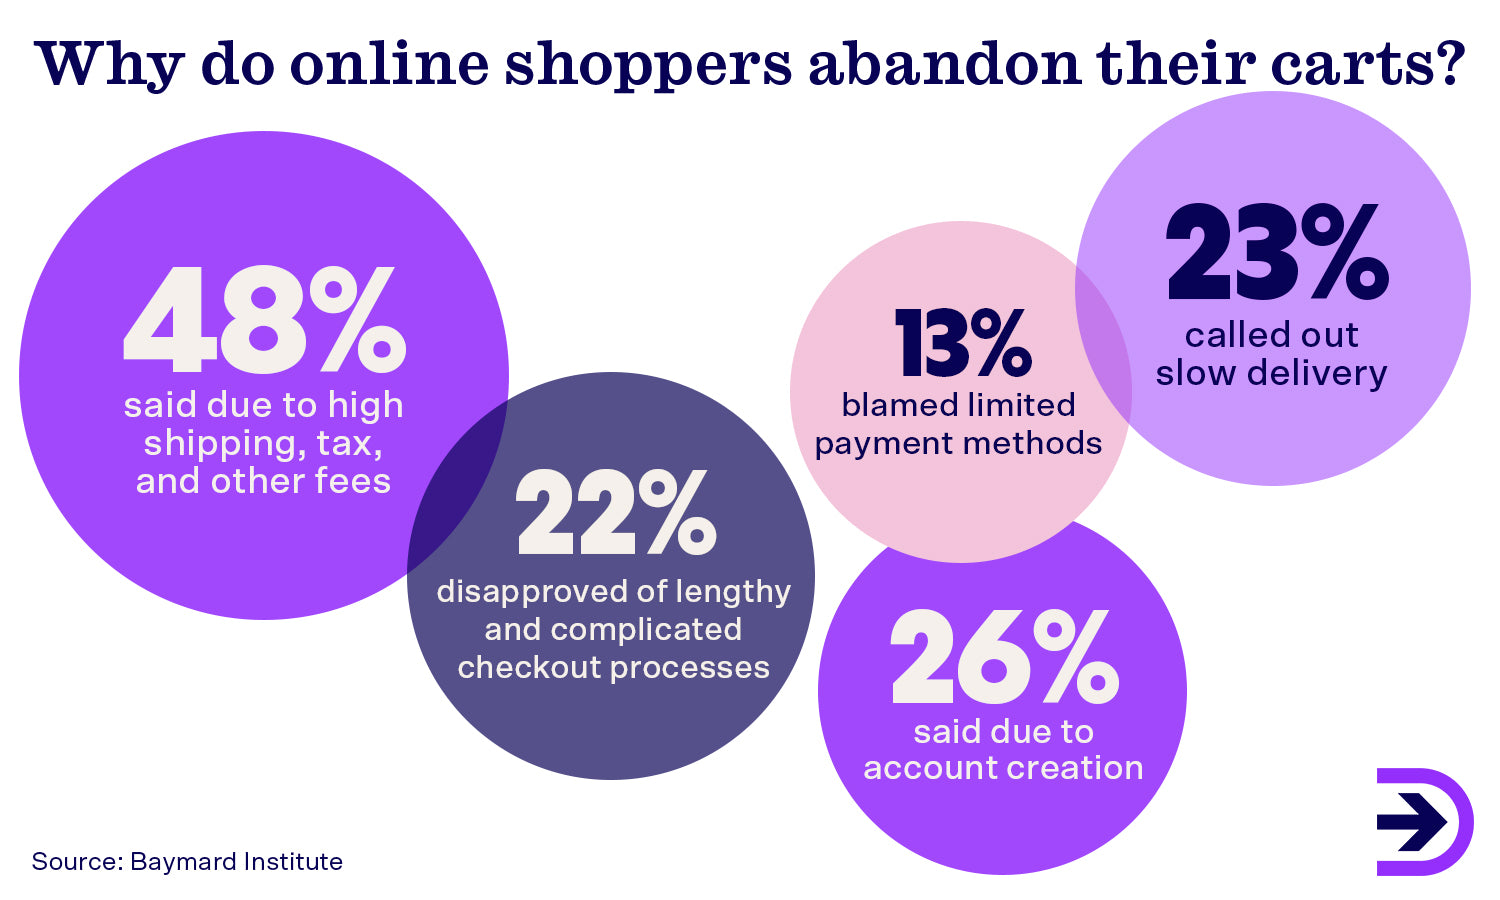 Online shoppers may abandon their carts due to high shipping fees, overly complicated checkout processes or slow delivery times.